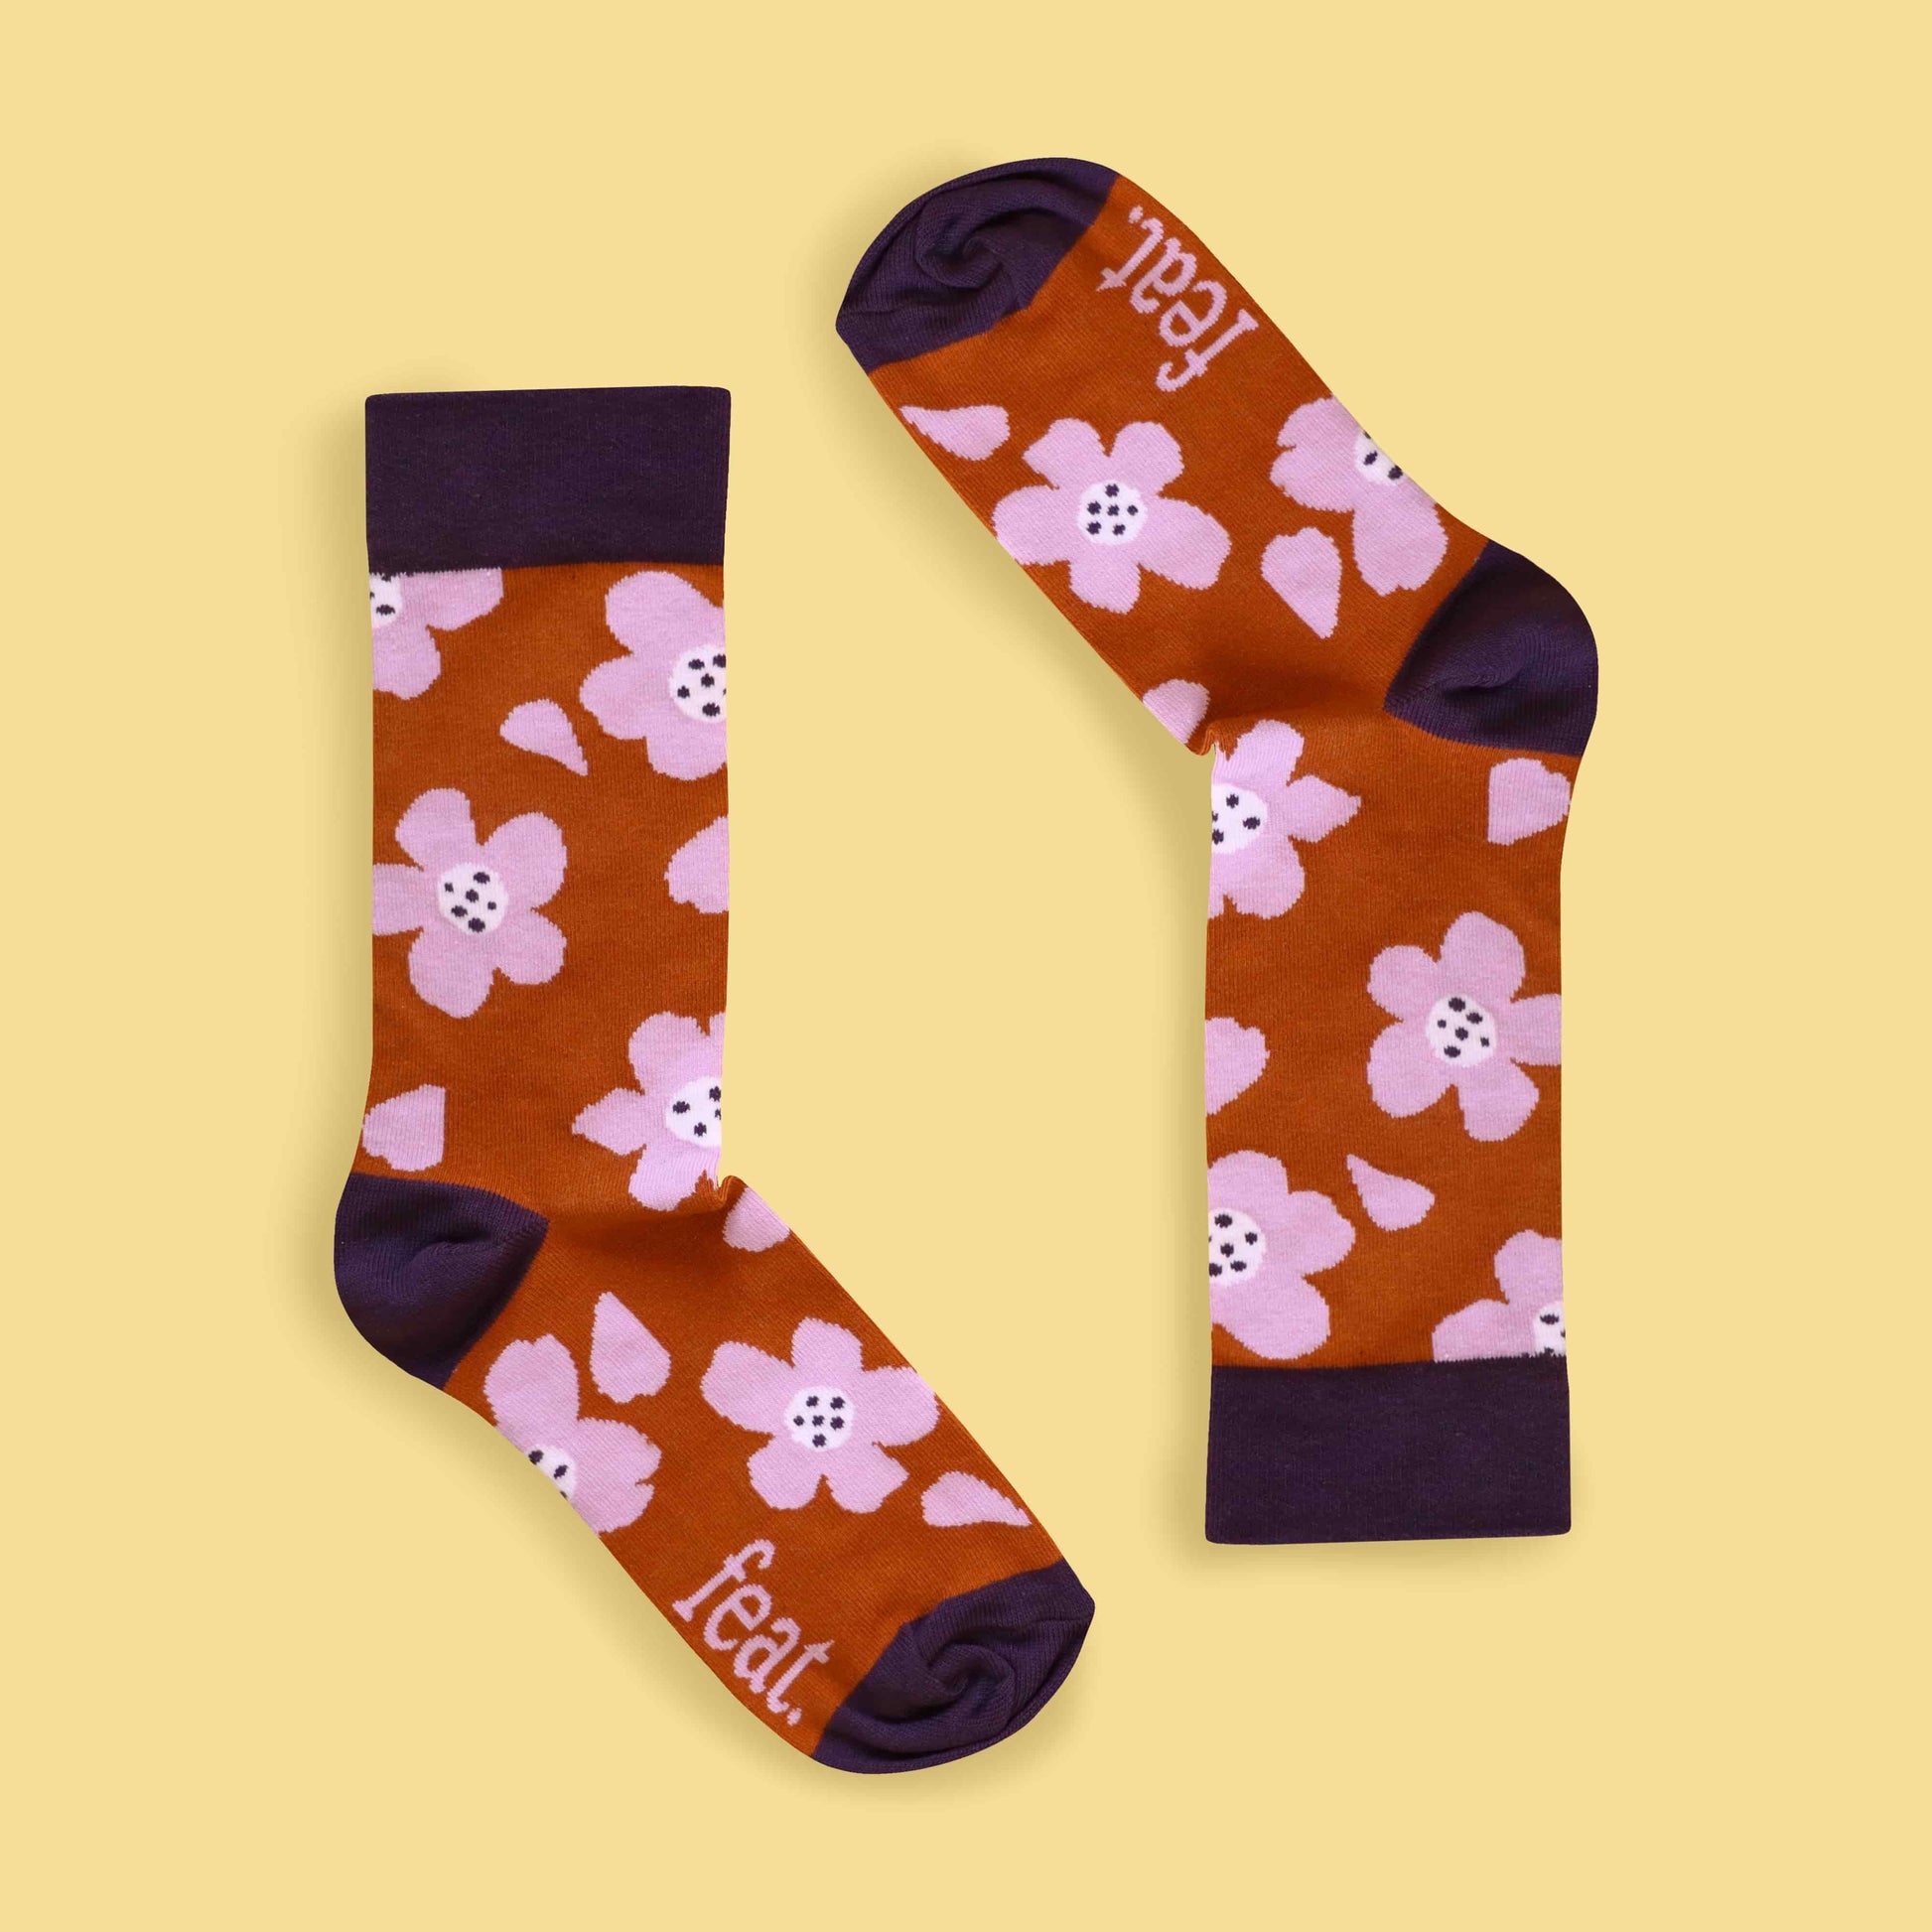 Rust and lilac floral socks inverted image yellow background